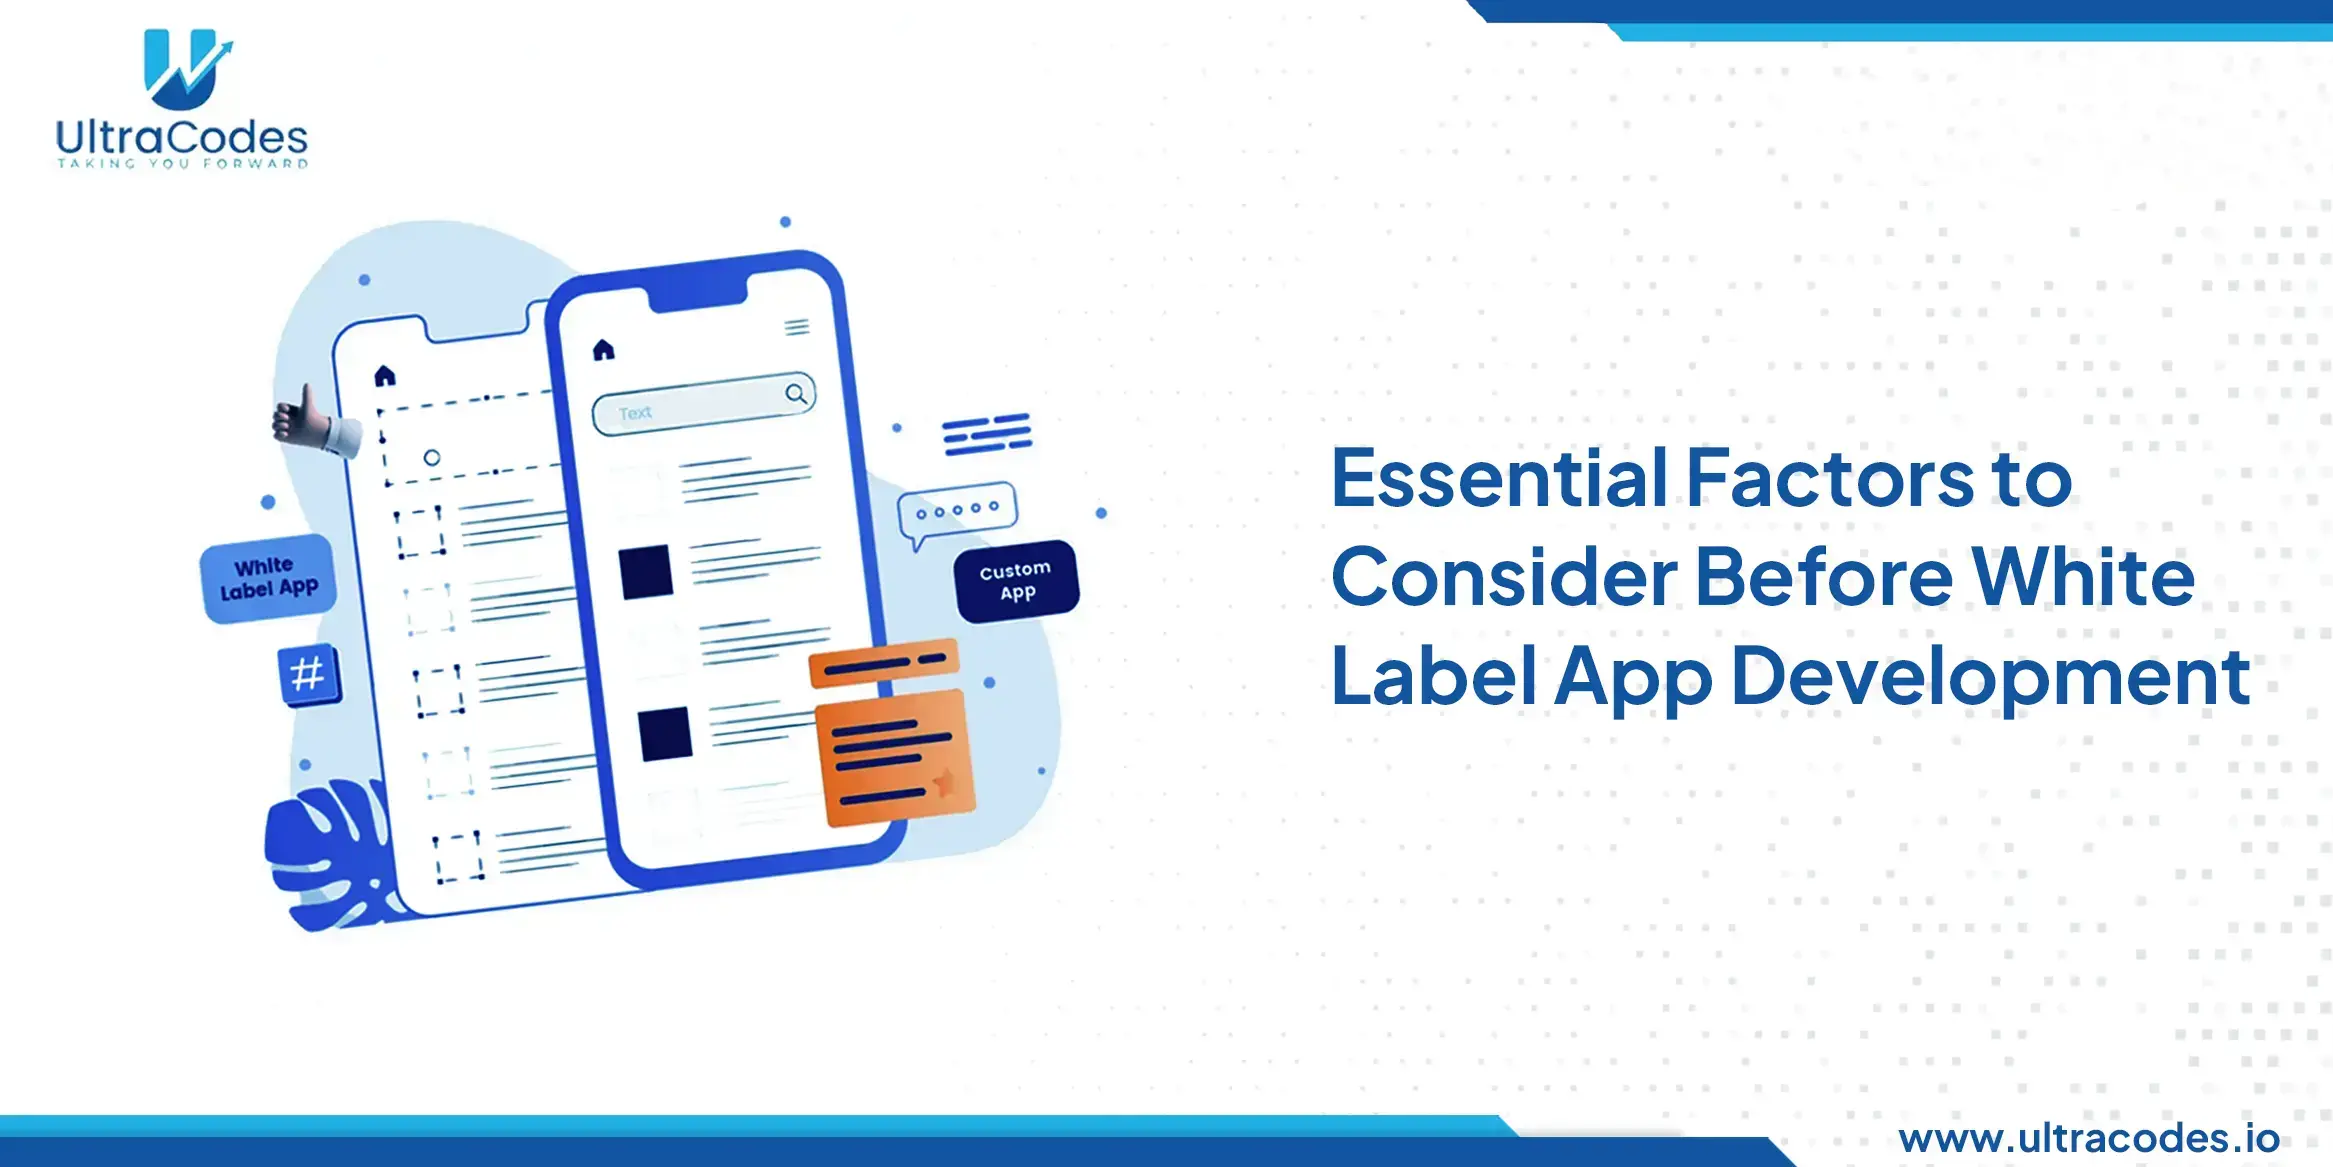 White Label App Development Article Featured Image with the title of Essential factors to consider before white label app development